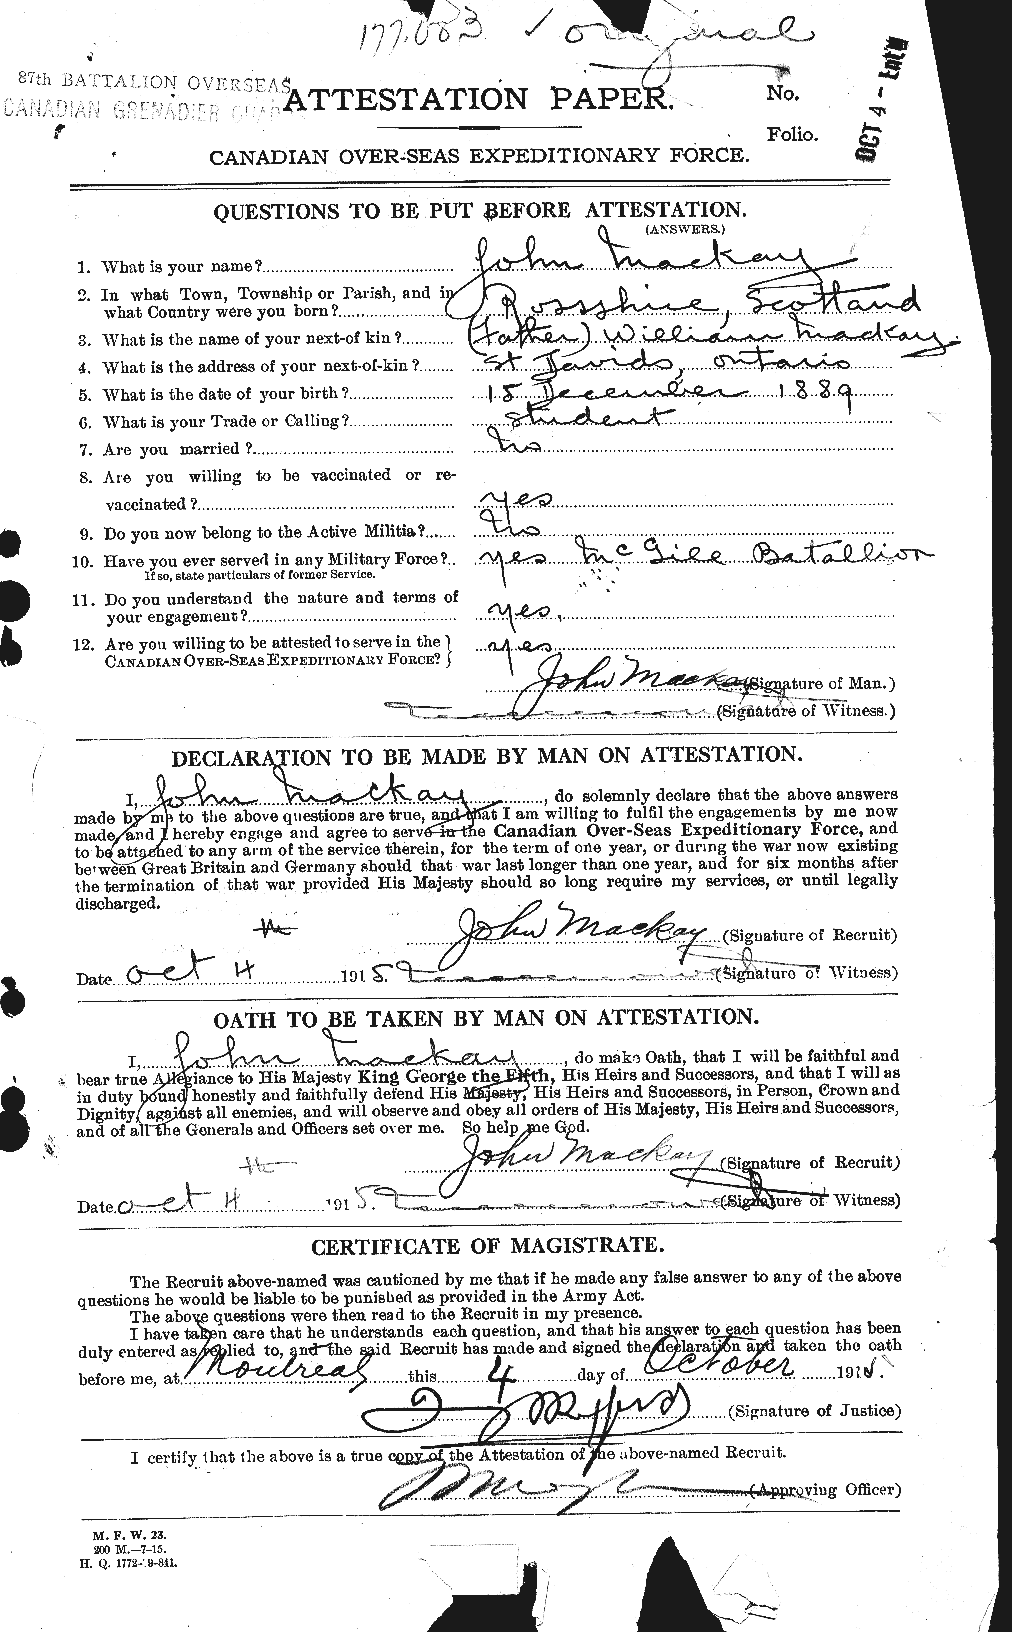 Personnel Records of the First World War - CEF 527003a